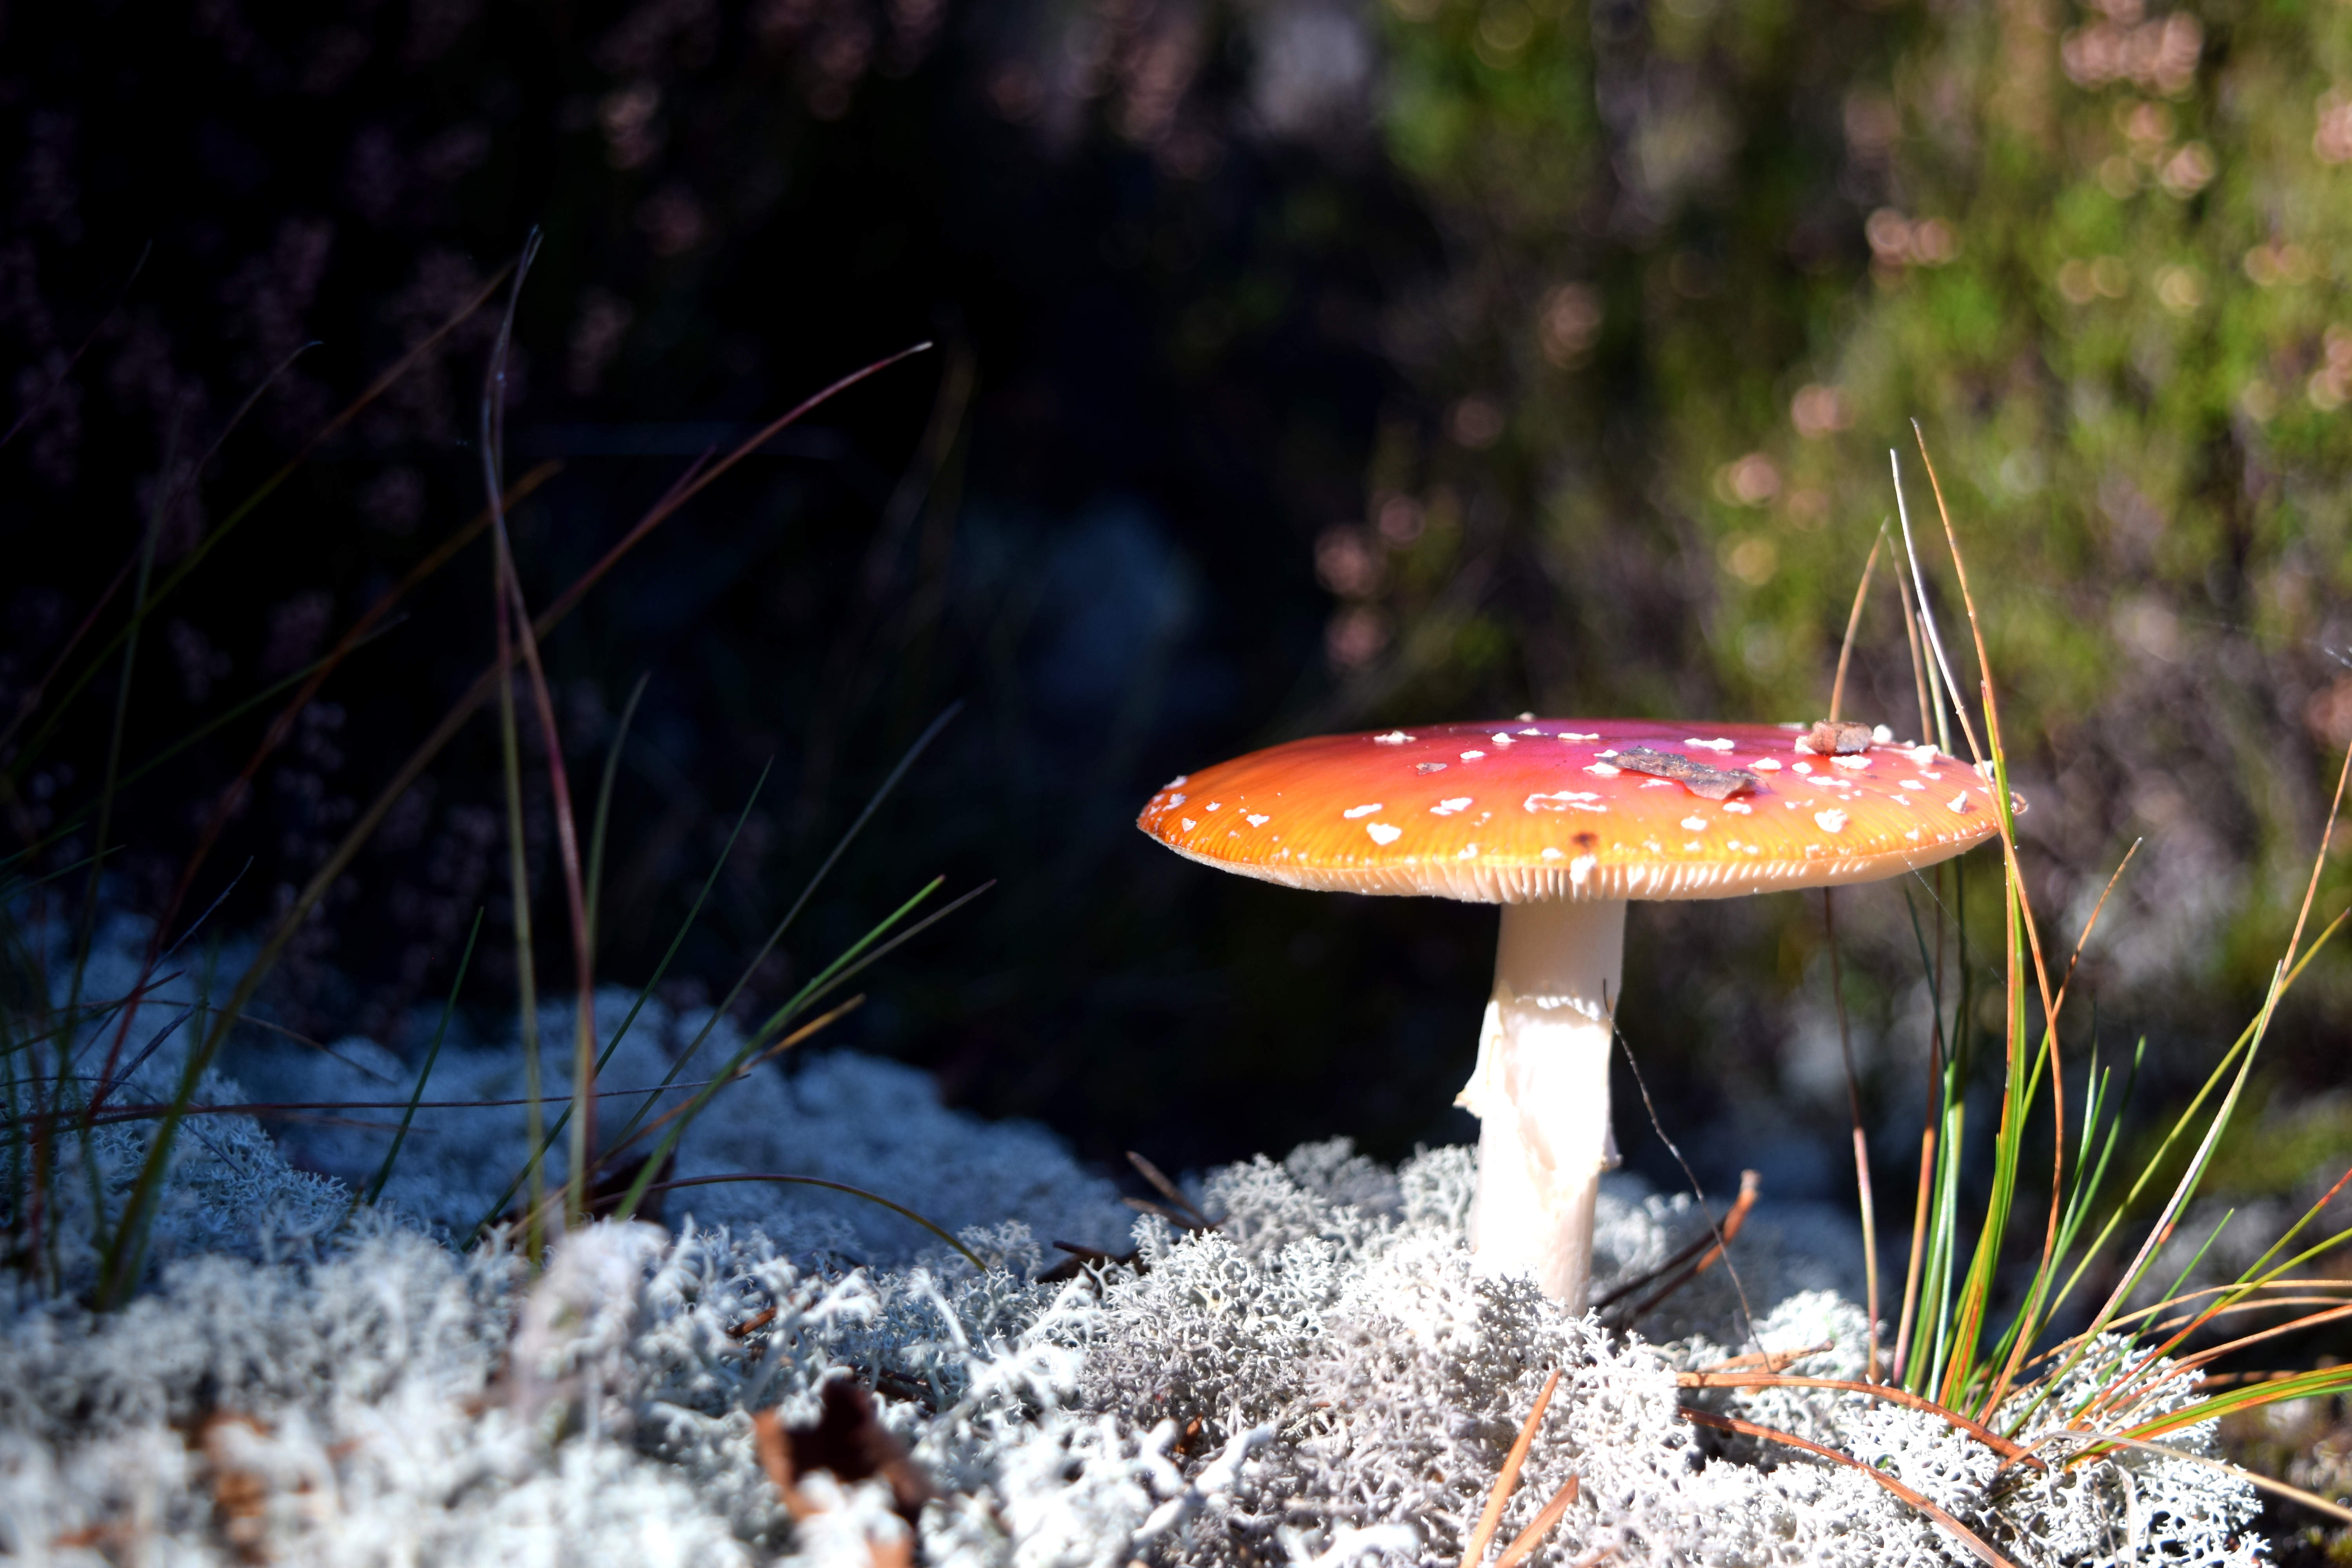 shiny-red Fly Agaric as a close-up shot in sunlit autumn forest